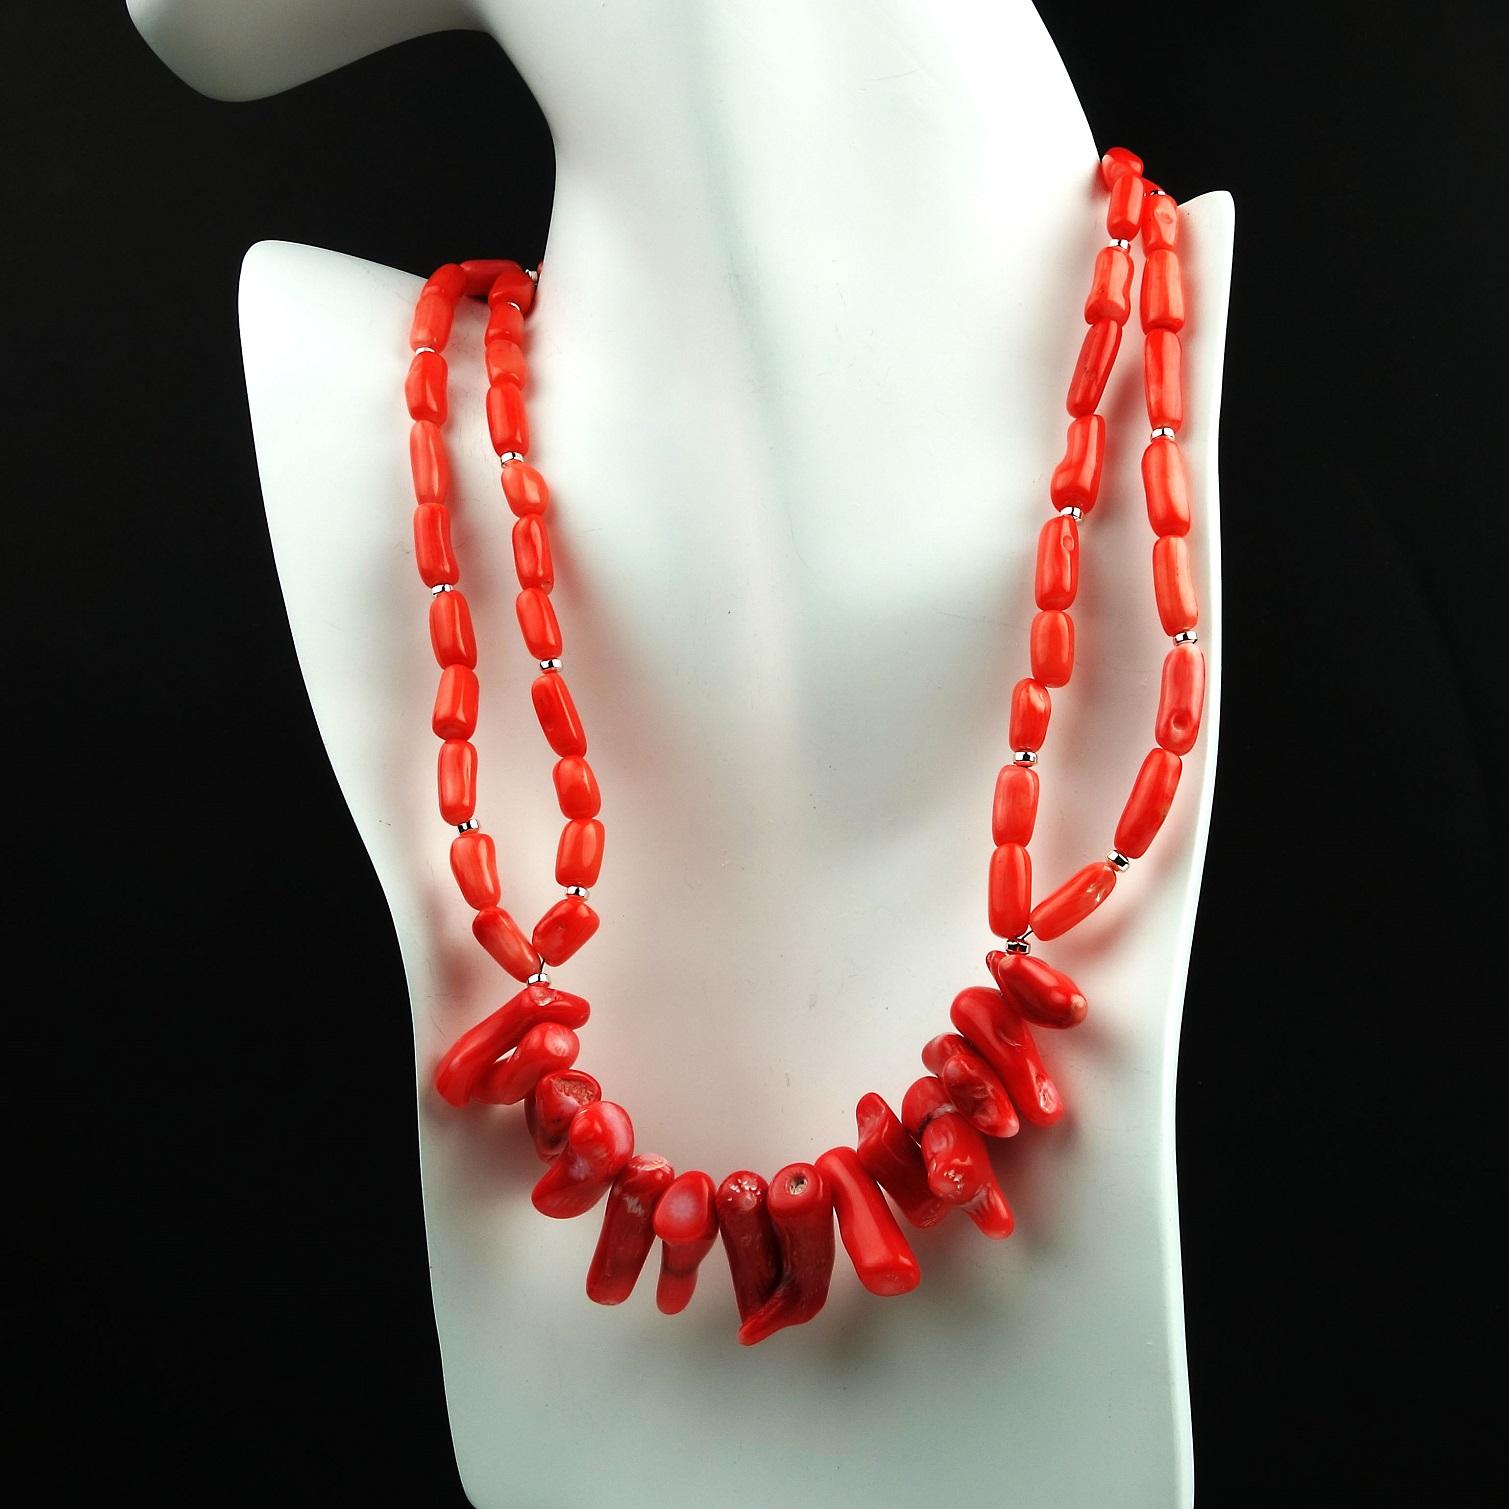 Bead AJD Orange Branch Coral with Fringe Front Necklace